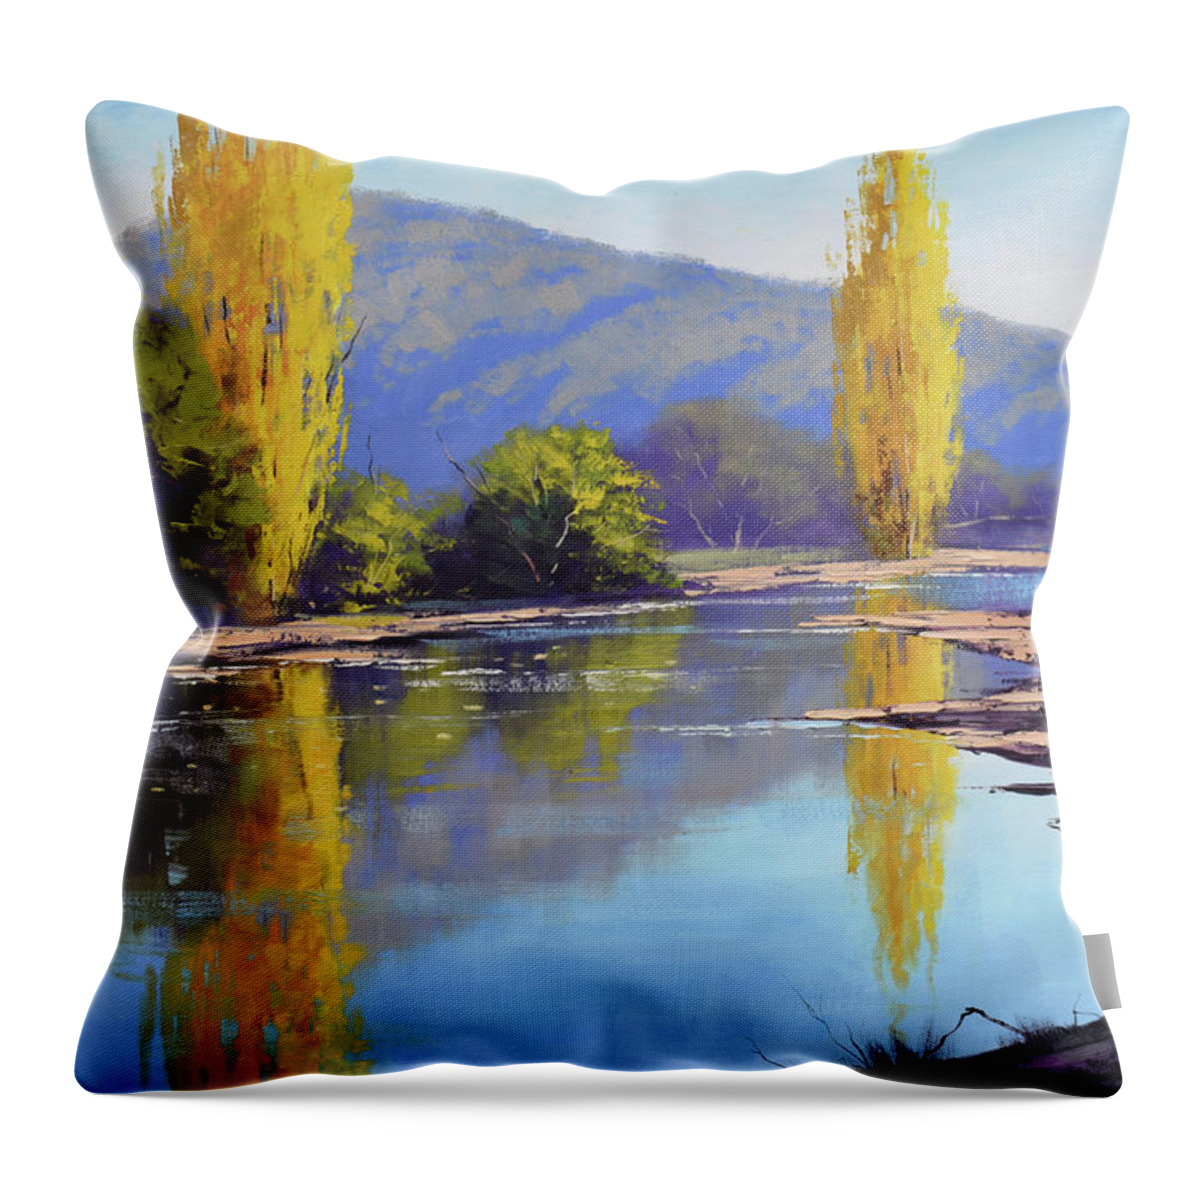 Colorful Throw Pillow featuring the painting Tumut River Poplars by Graham Gercken